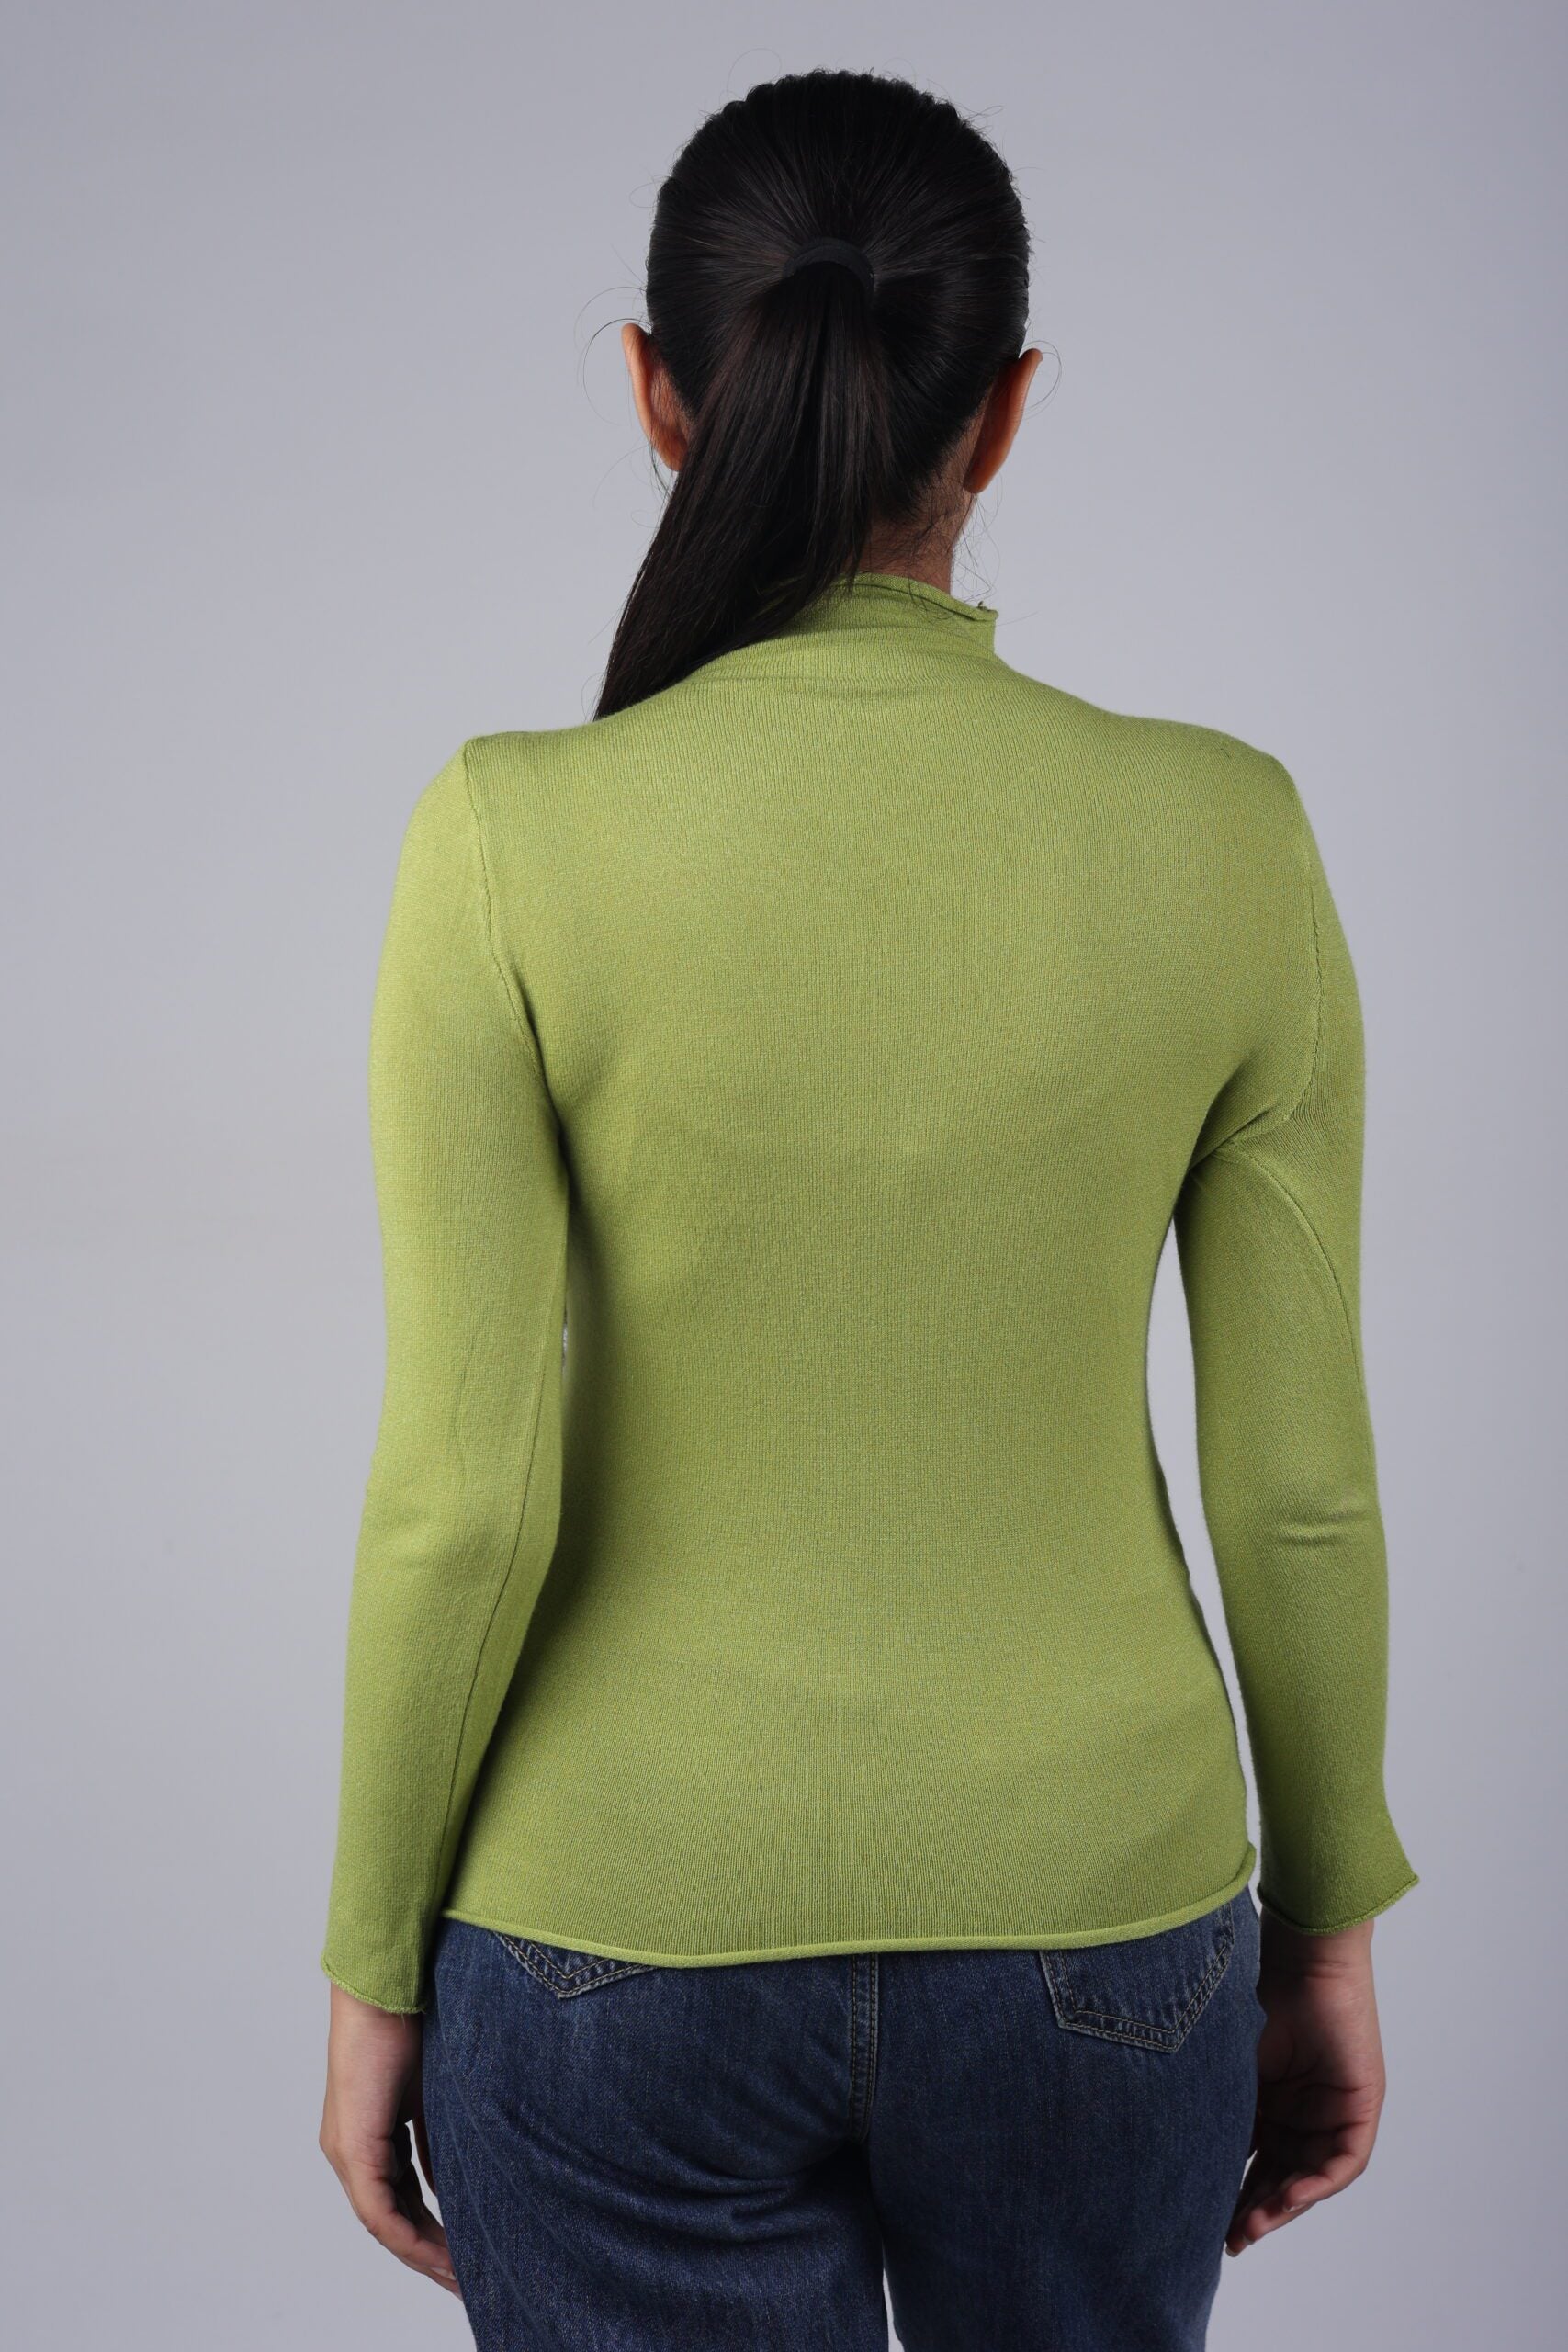 T-neck Basic Knitted Top (Lime Green) A Refreshing Twist on Timeless Comfort and Style!